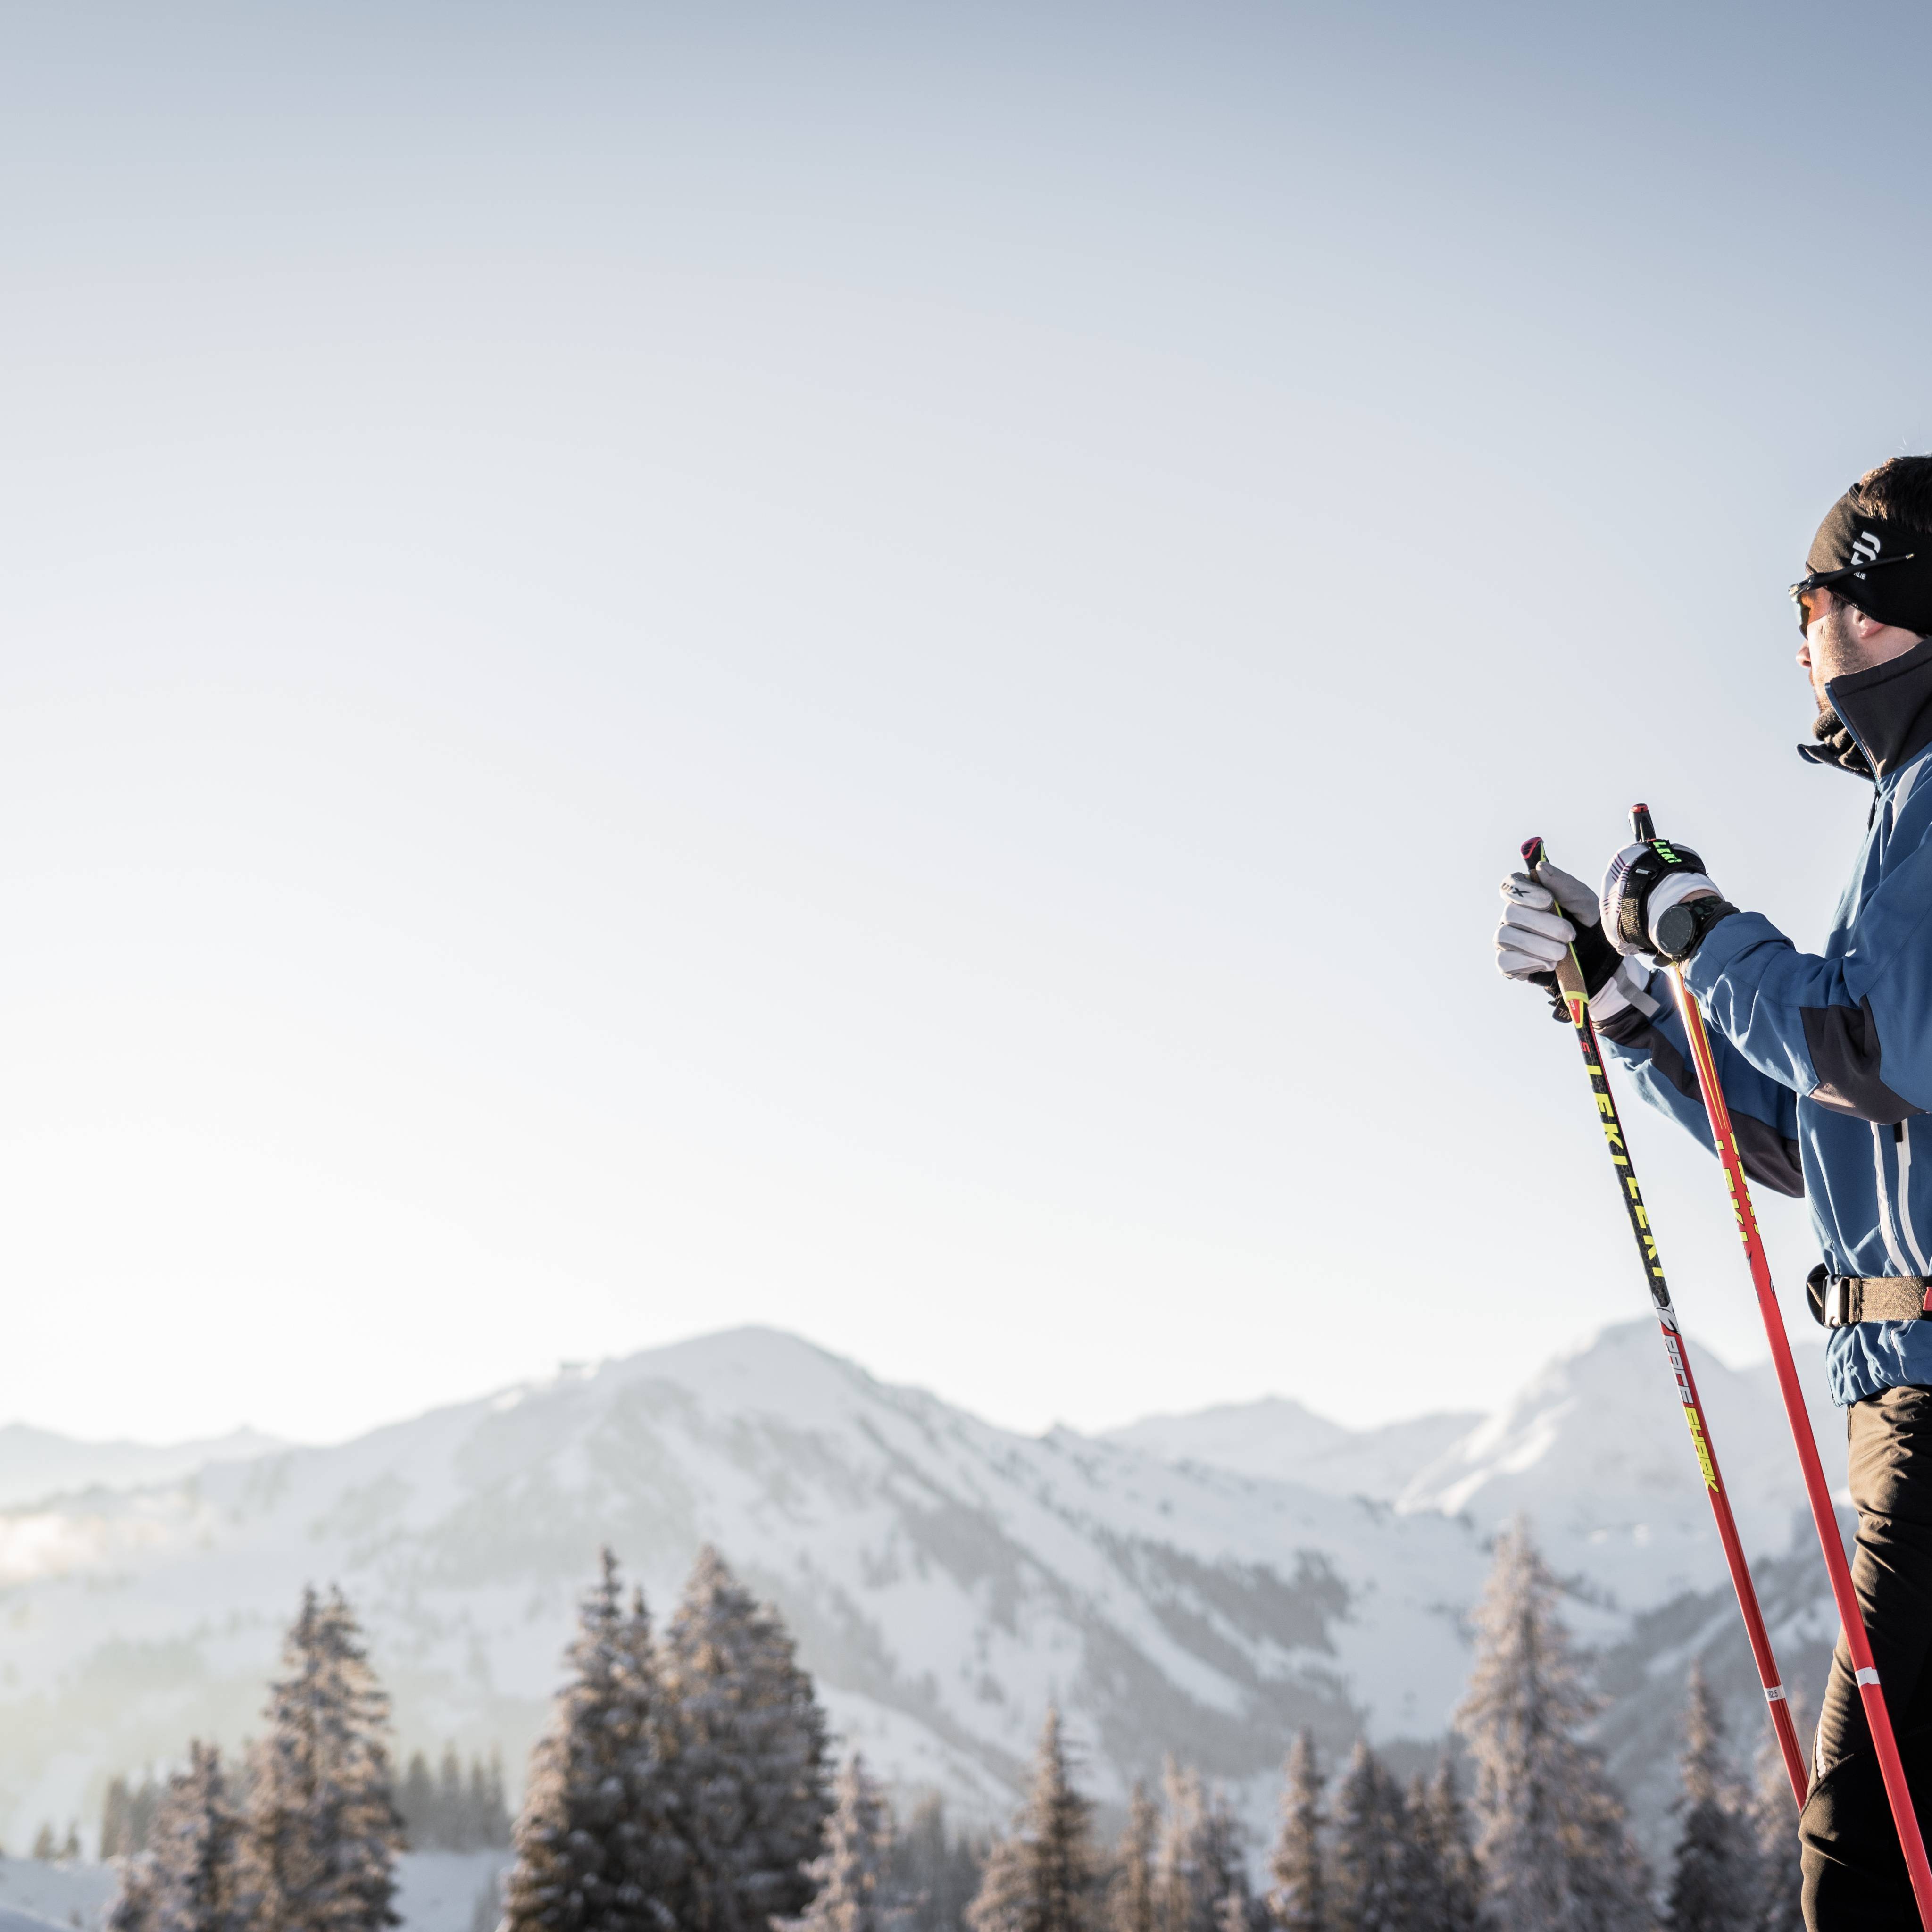 Four-legged fun: Cross-country skiing with your dog - Hotel Gstaaderhof